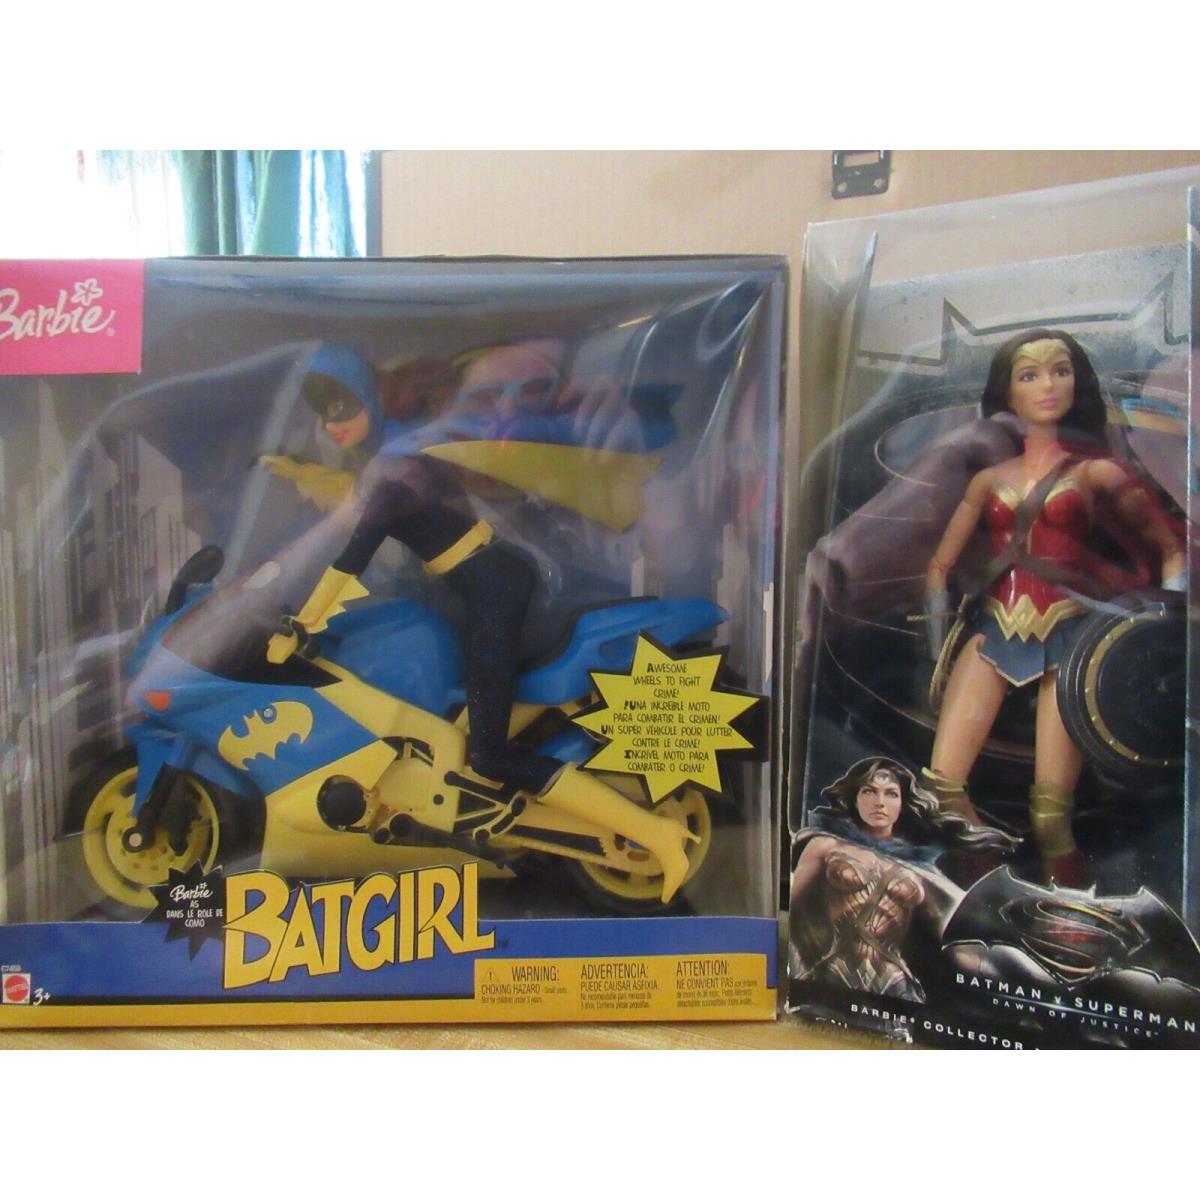 2003 Batgirl Barbie w Motorcycle with Wonder Woman Never Opened